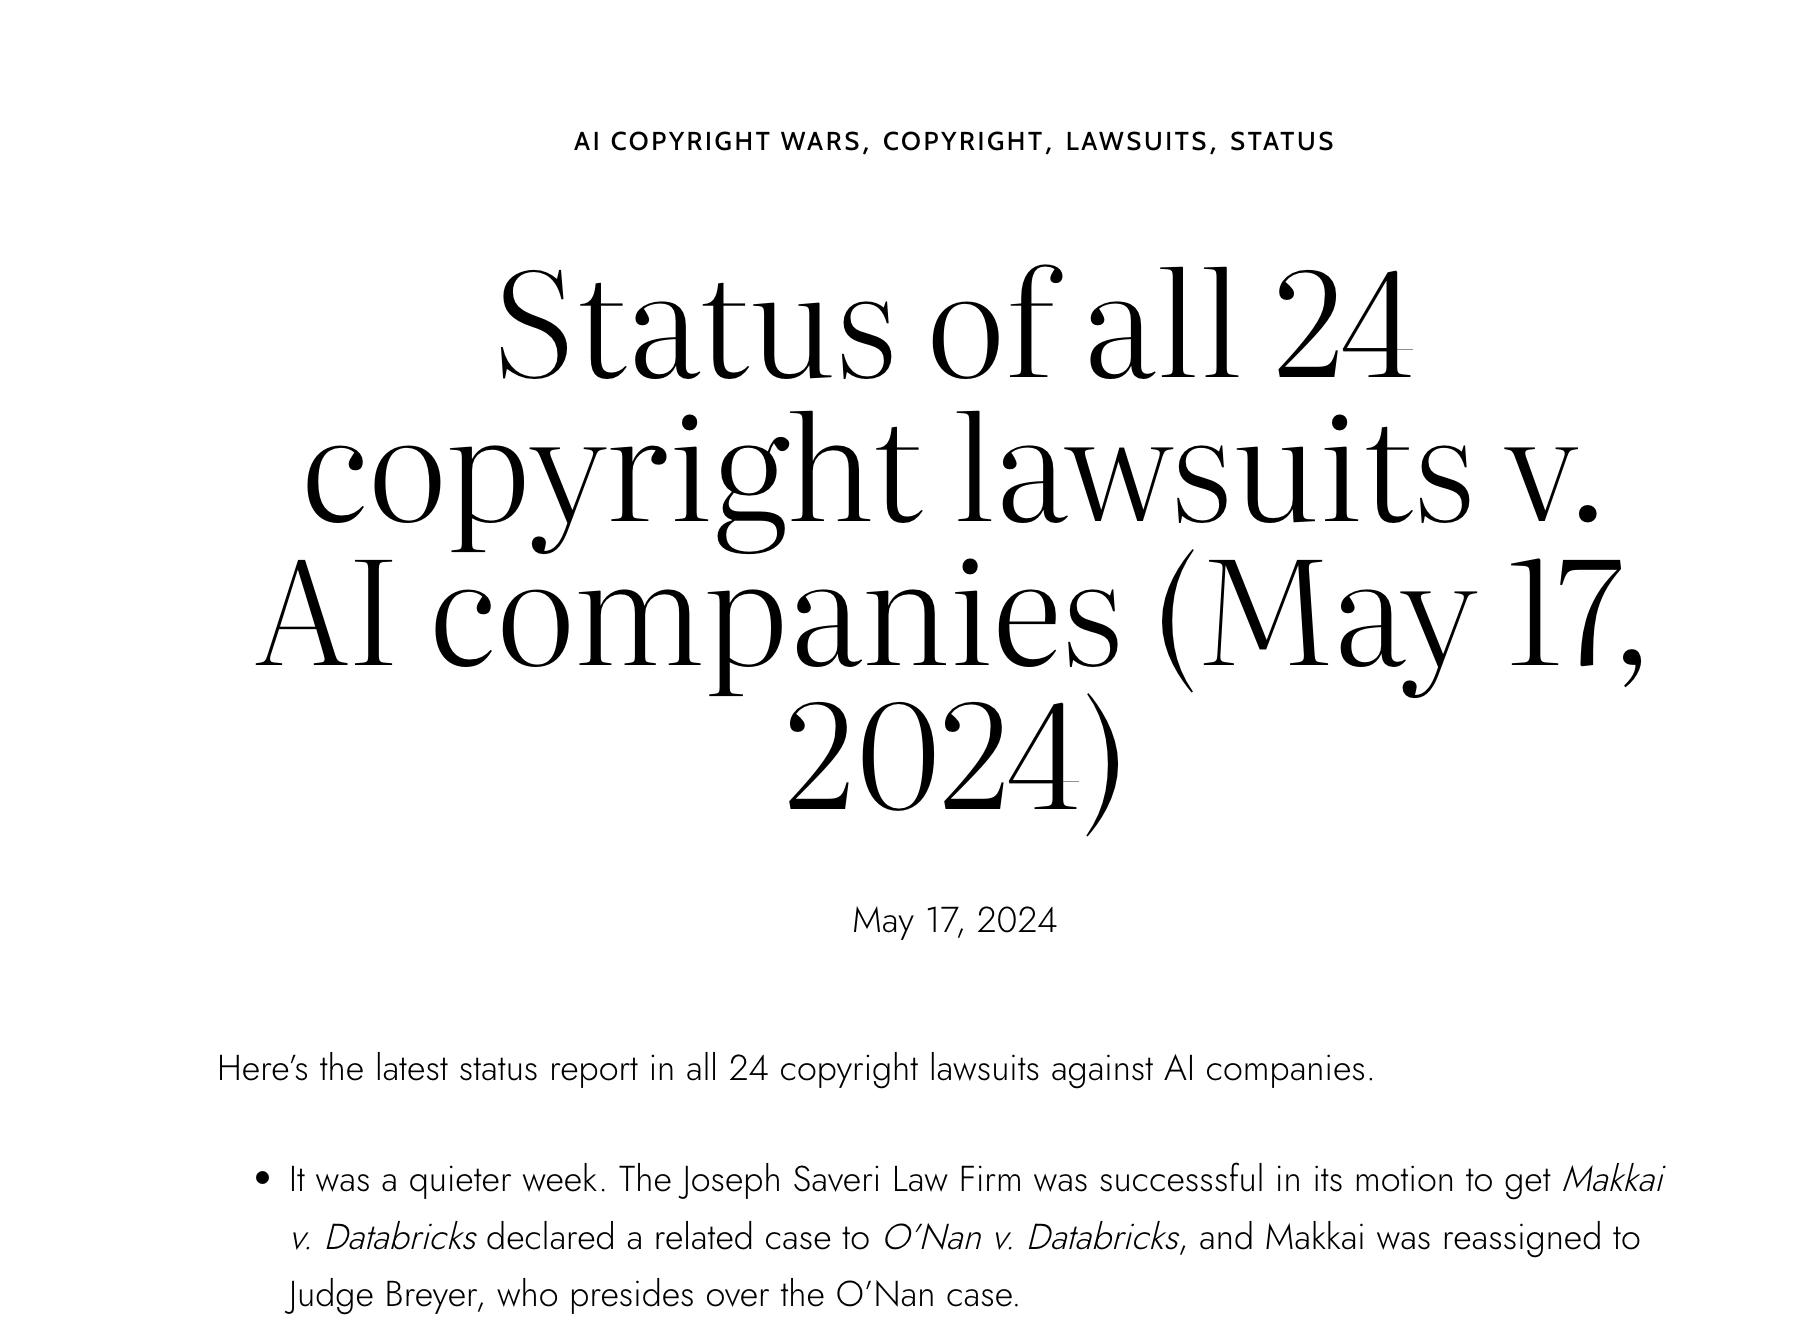 Status of all 24 copyright lawsuits v. AI companies (May 17, 2024)